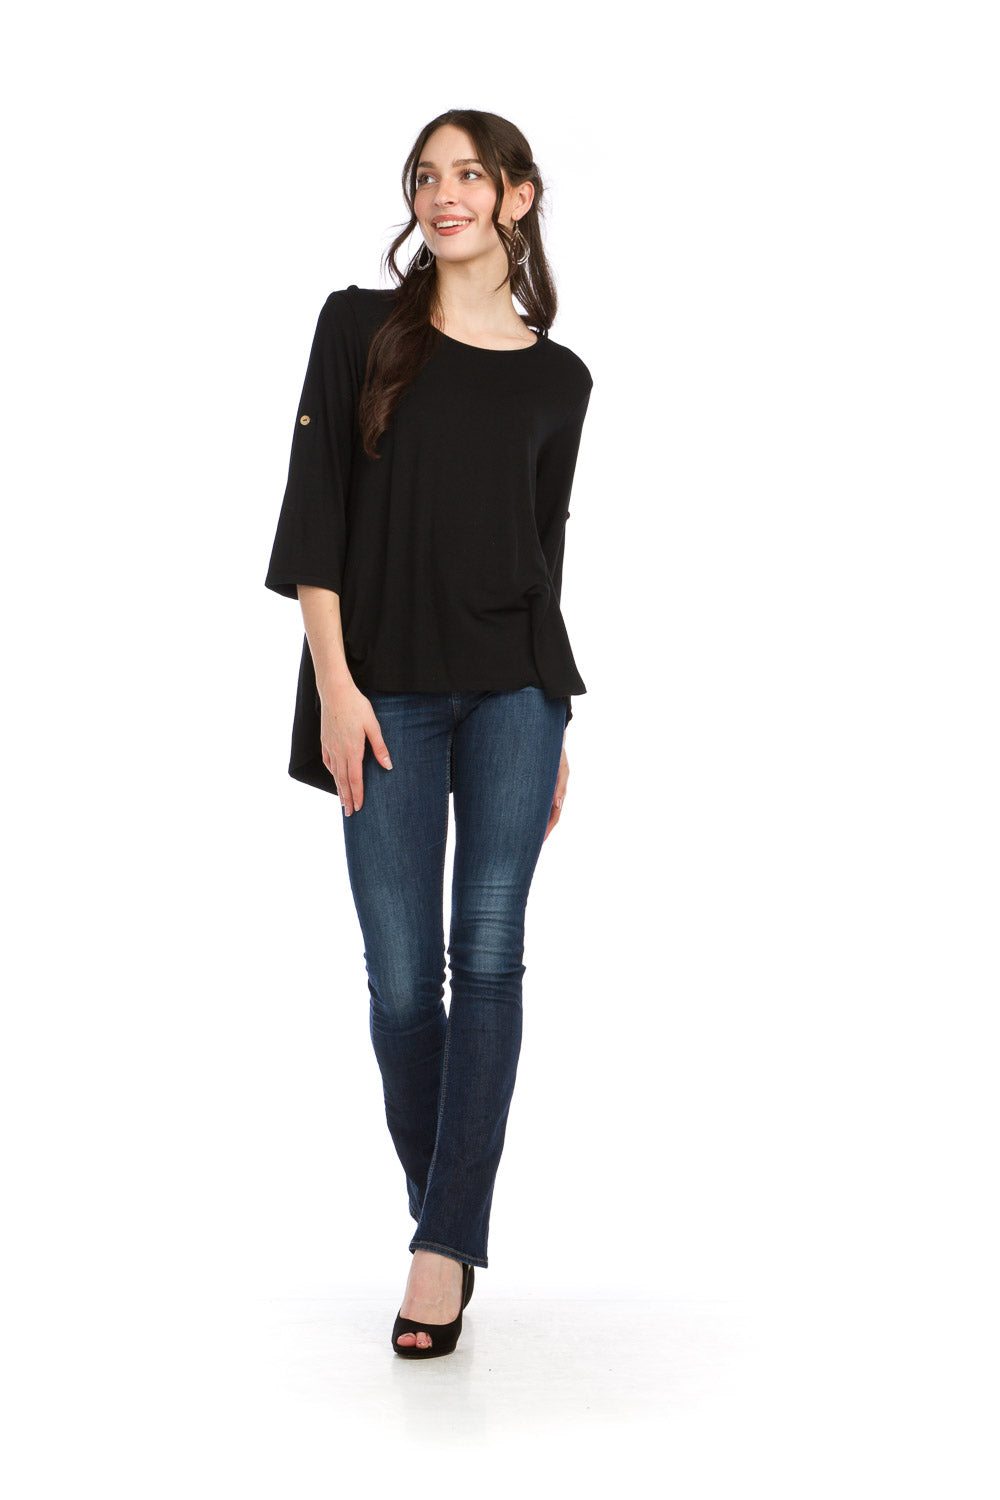 PT-15036 - BAMBOO STRETCH HIGH LOW TOP WITH BACK BUTTON